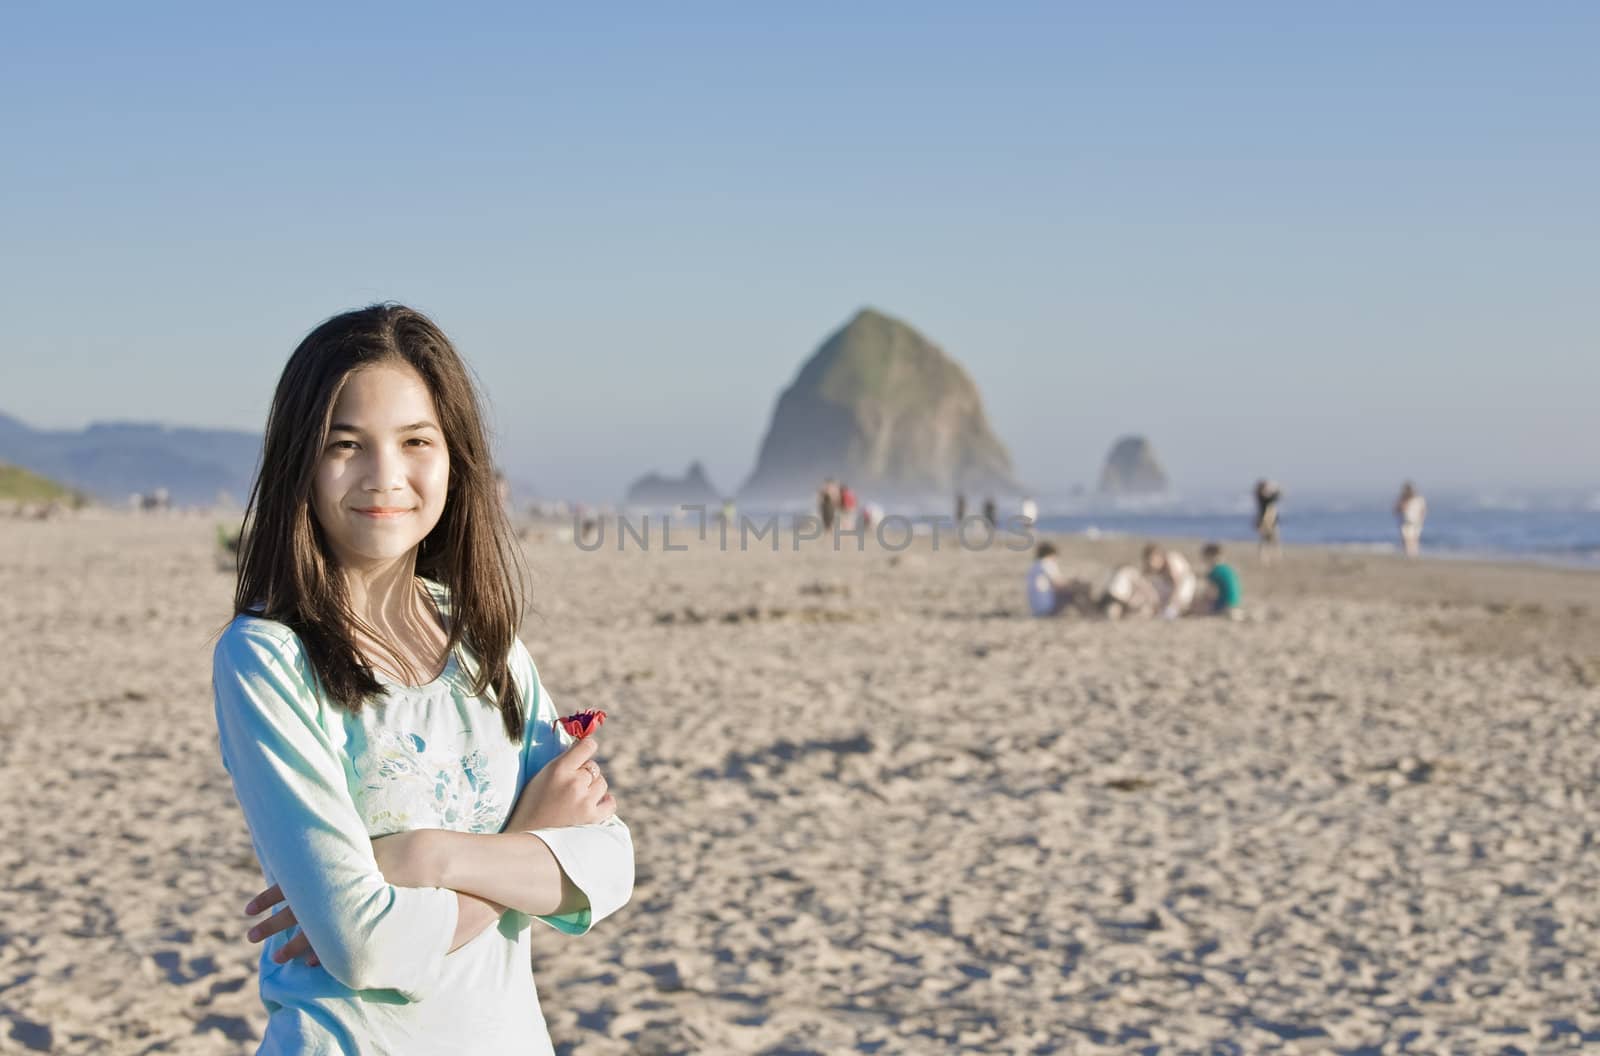 Beautiful preteen girl smiling on beach with Haystack Rock of Cannon Beach, OR in background